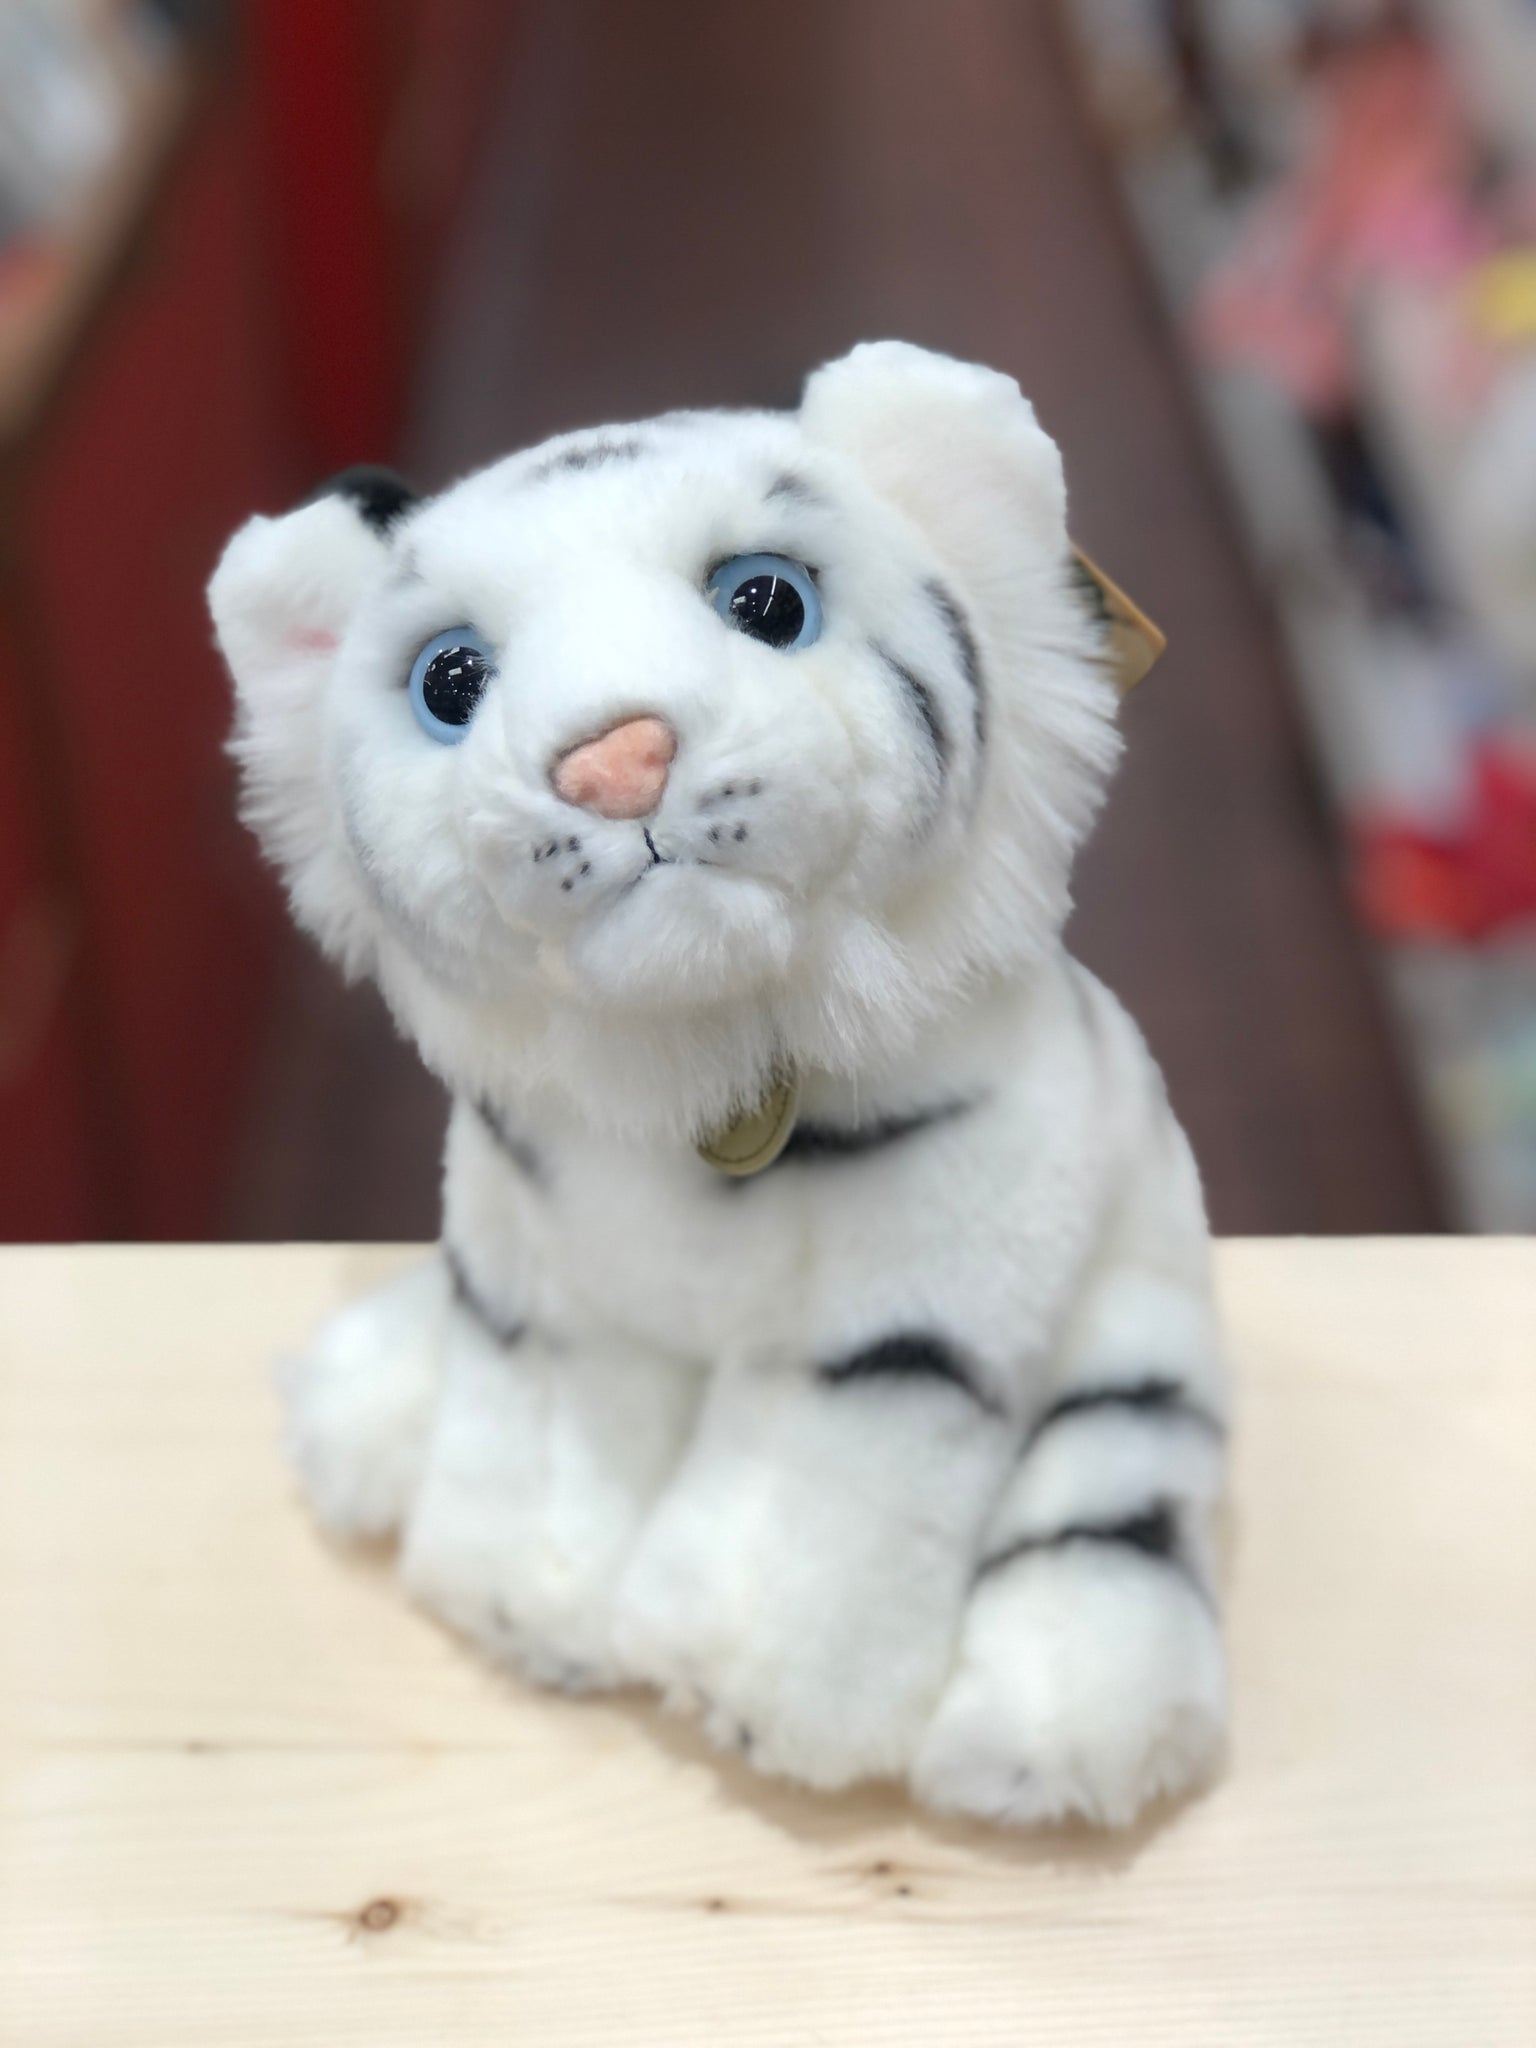 All You Have Ever Wanted To Know About White Tigers